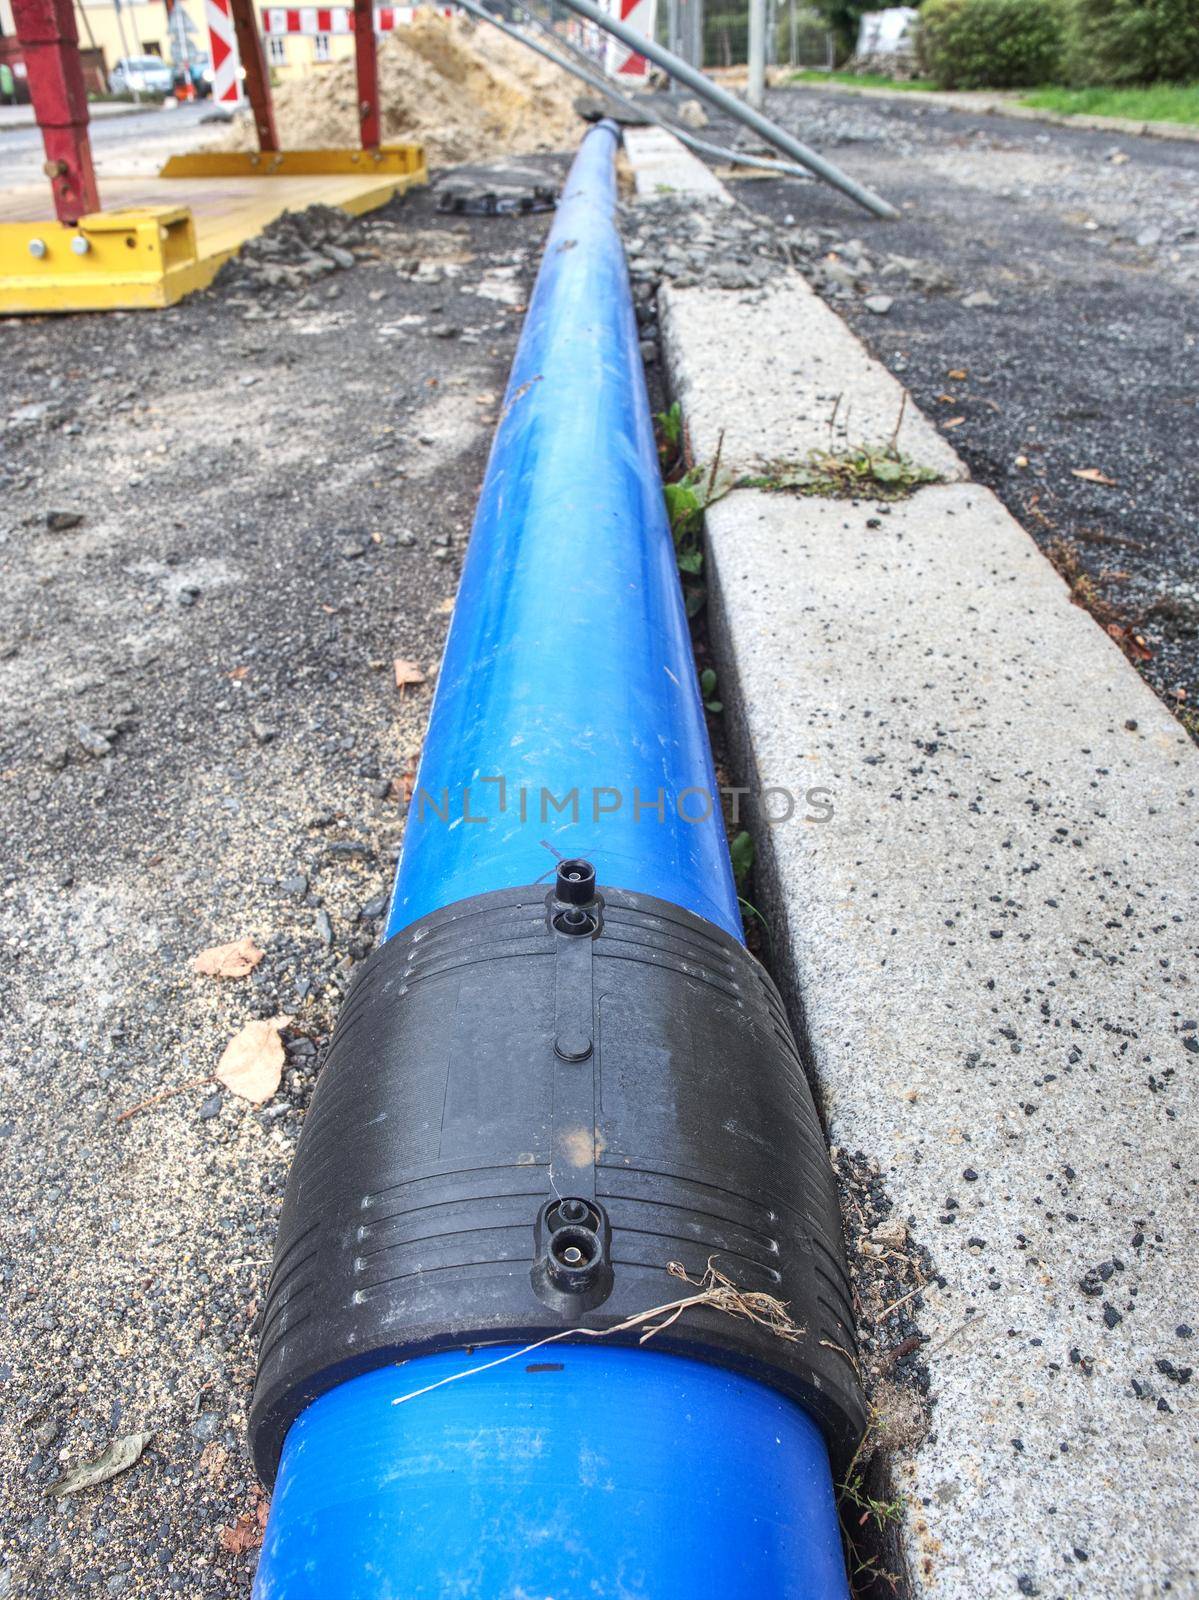 Repair of city water supply, replacement of rusty pipes  by rdonar2